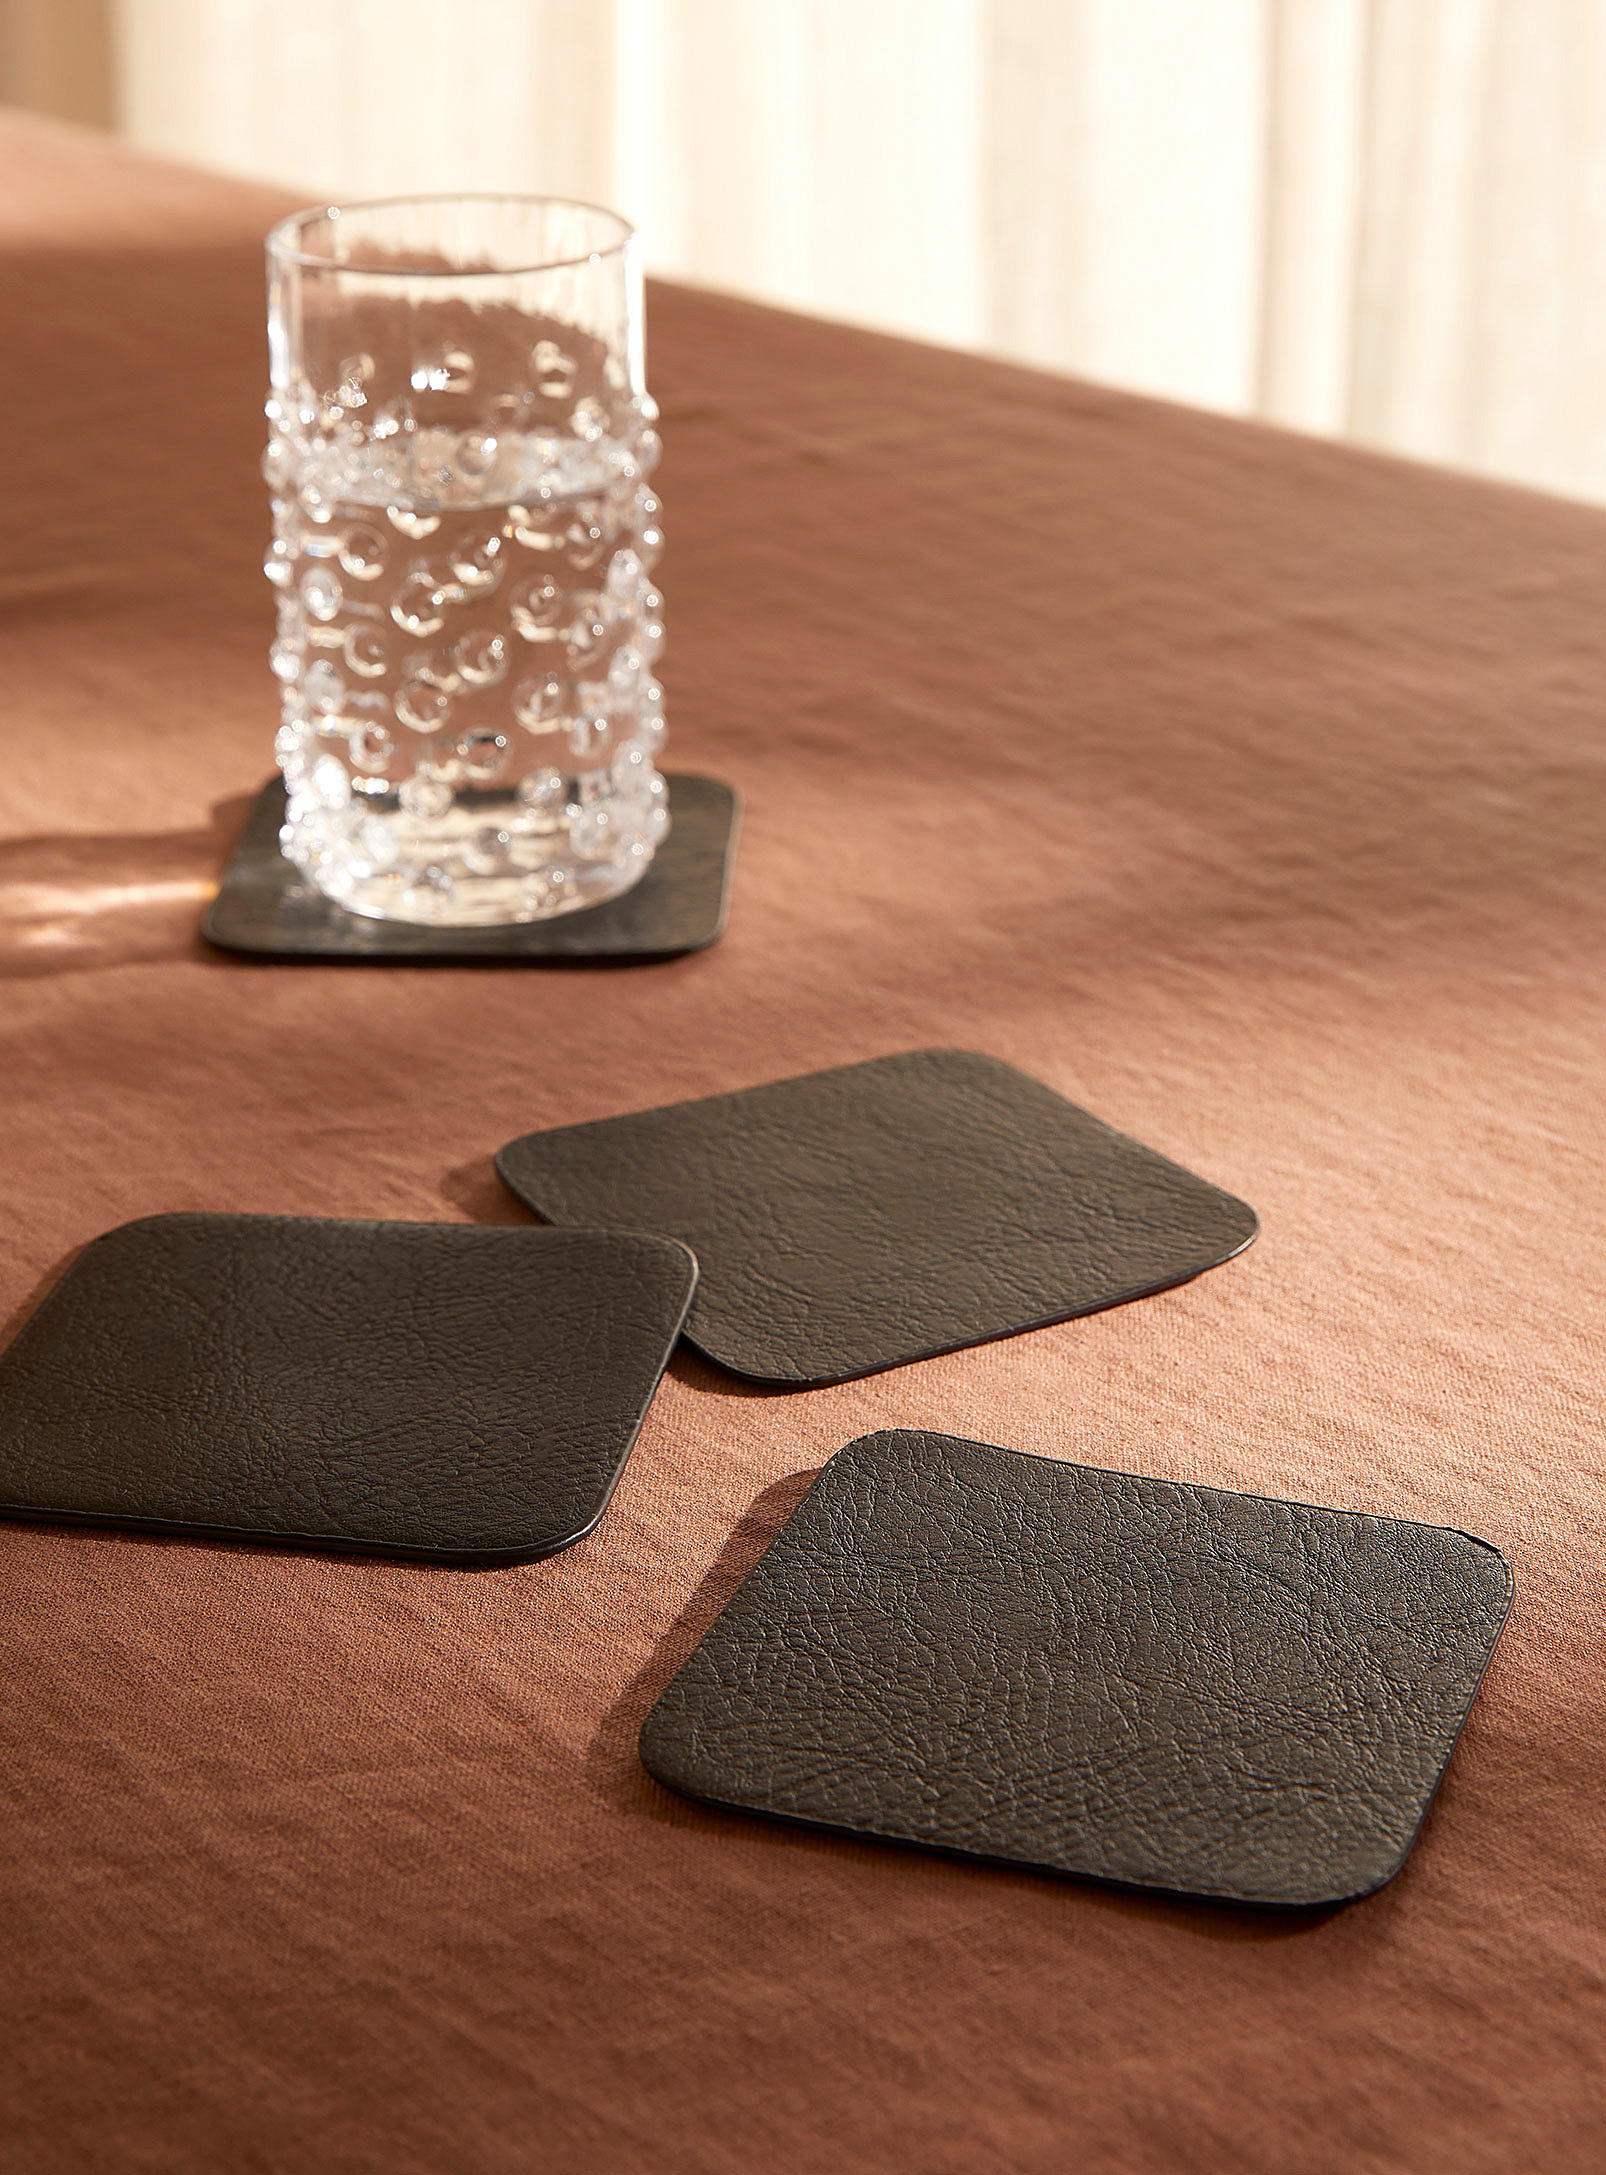 Simons Maison Grained Faux-leather Coasters Set Of 4 In Black